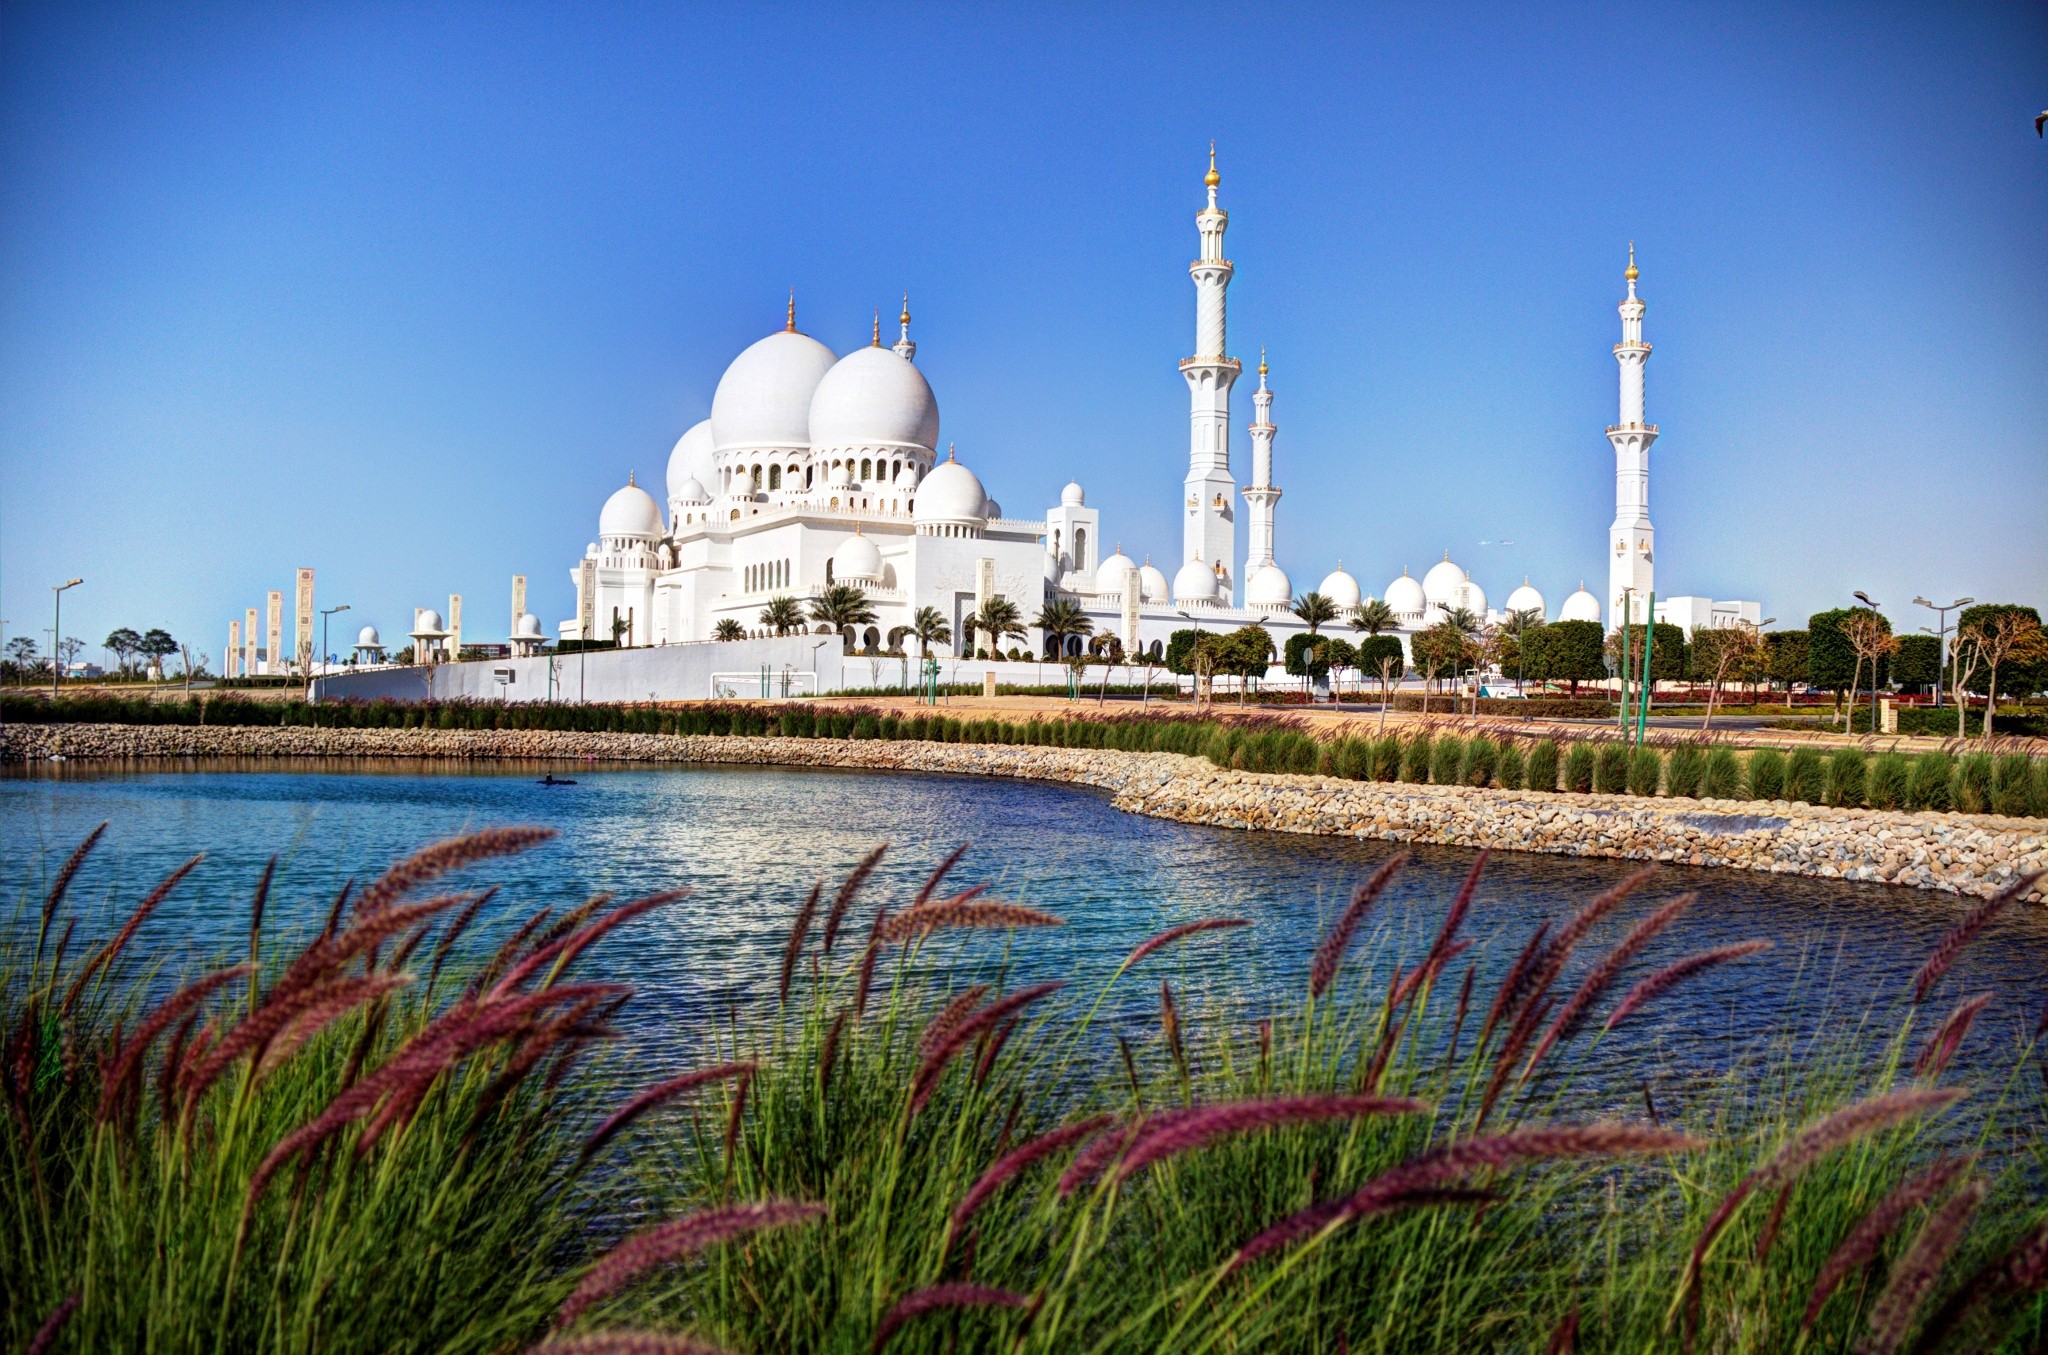 General 2048x1355 mosque Islamic architecture Abu Dhabi palm trees palace